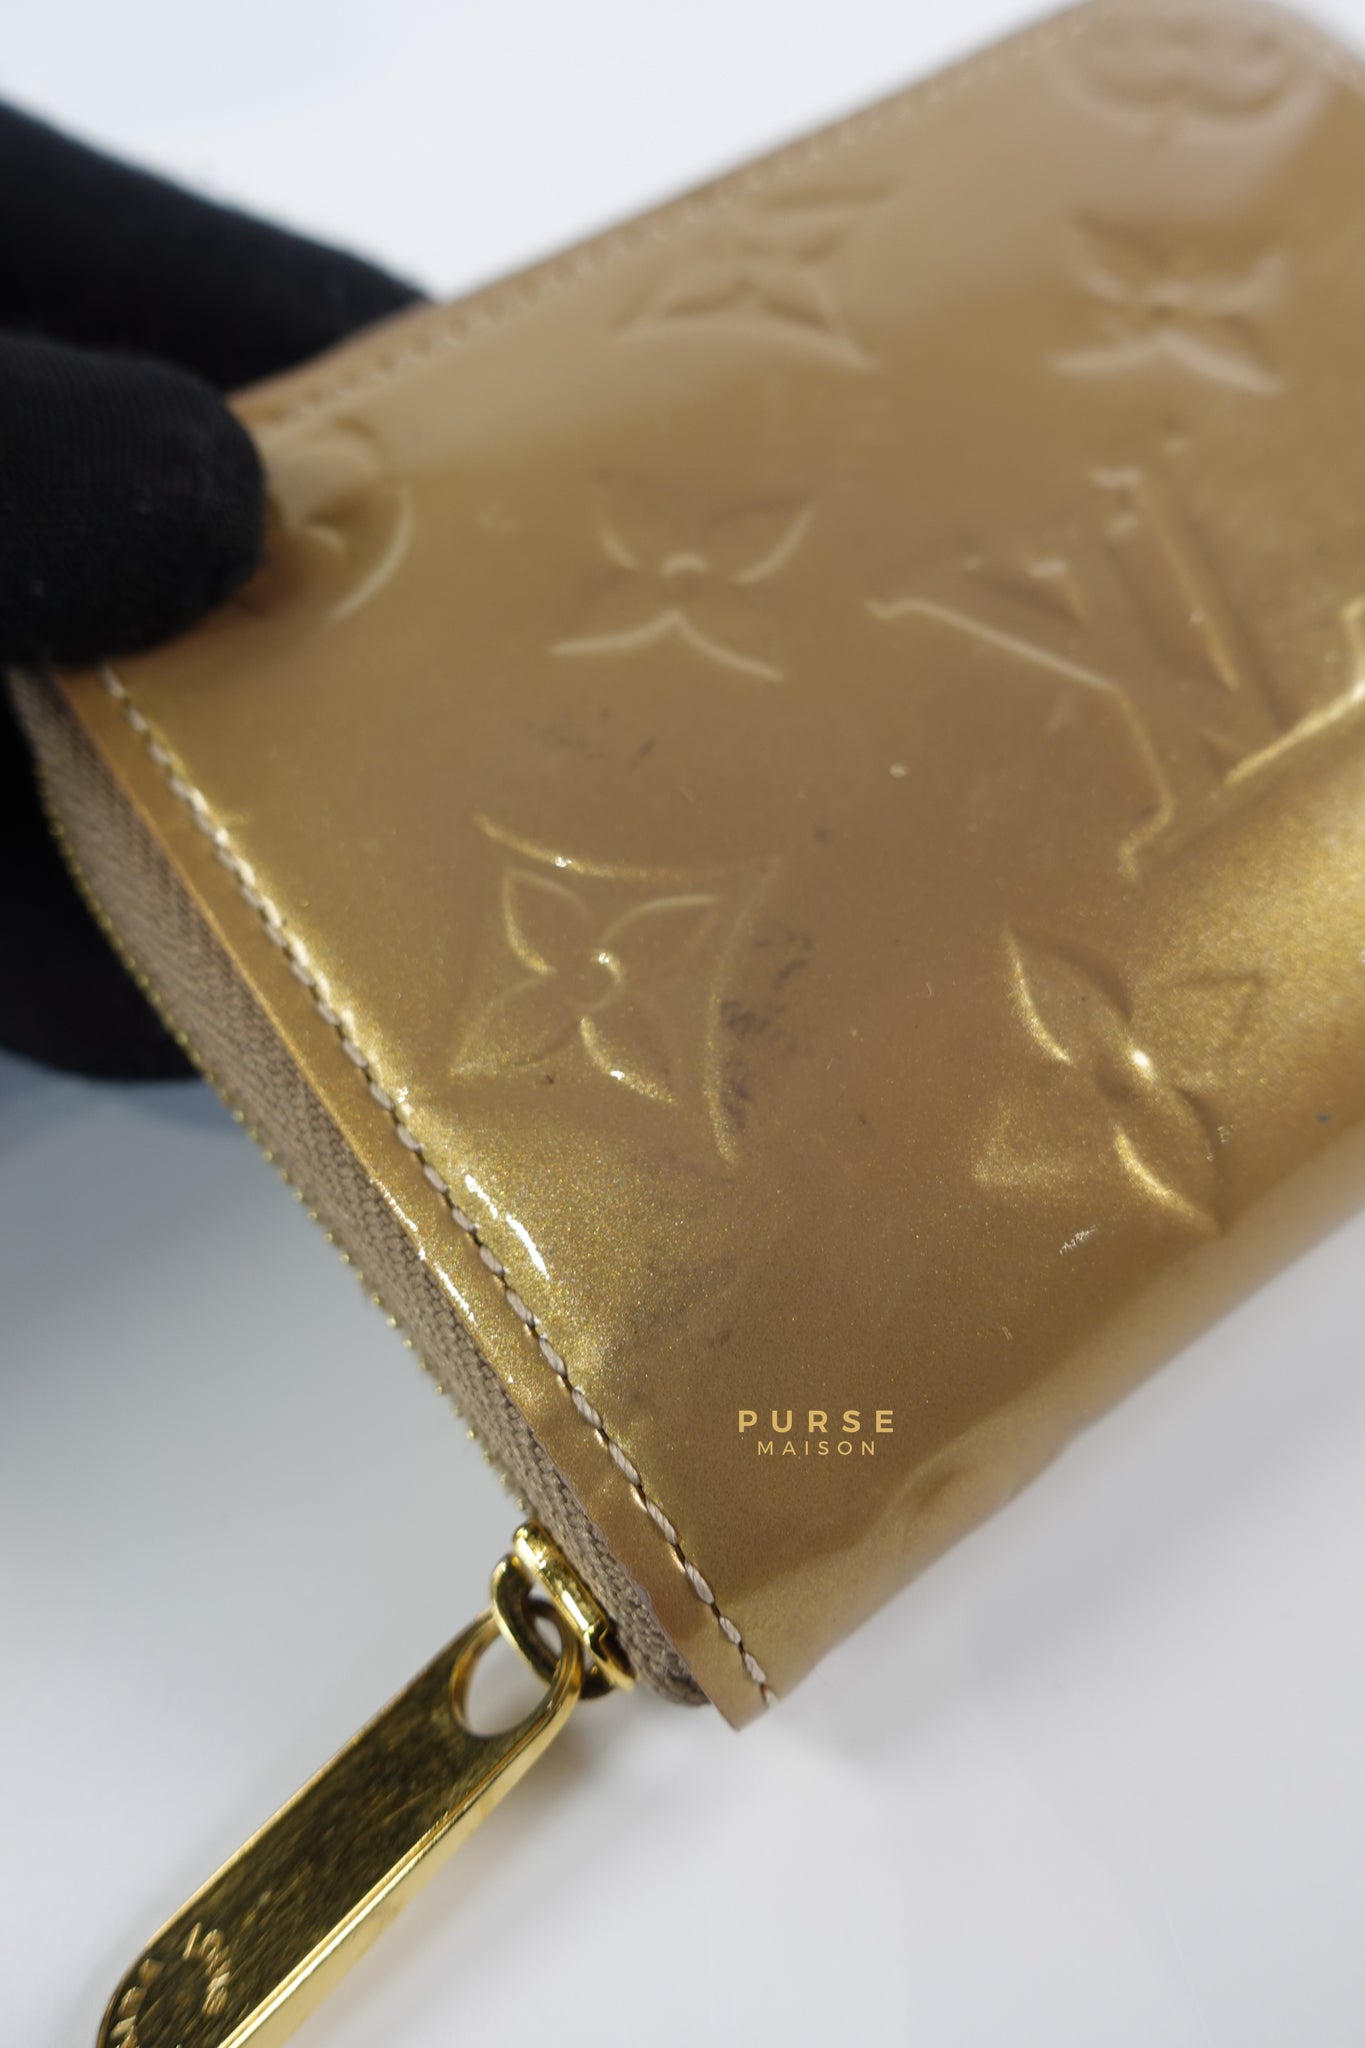 Zippy Coin Purse Wallet in Beige Pearl Vernis Patent Leather (Date code: TS2193) | Purse Maison Luxury Bags Shop